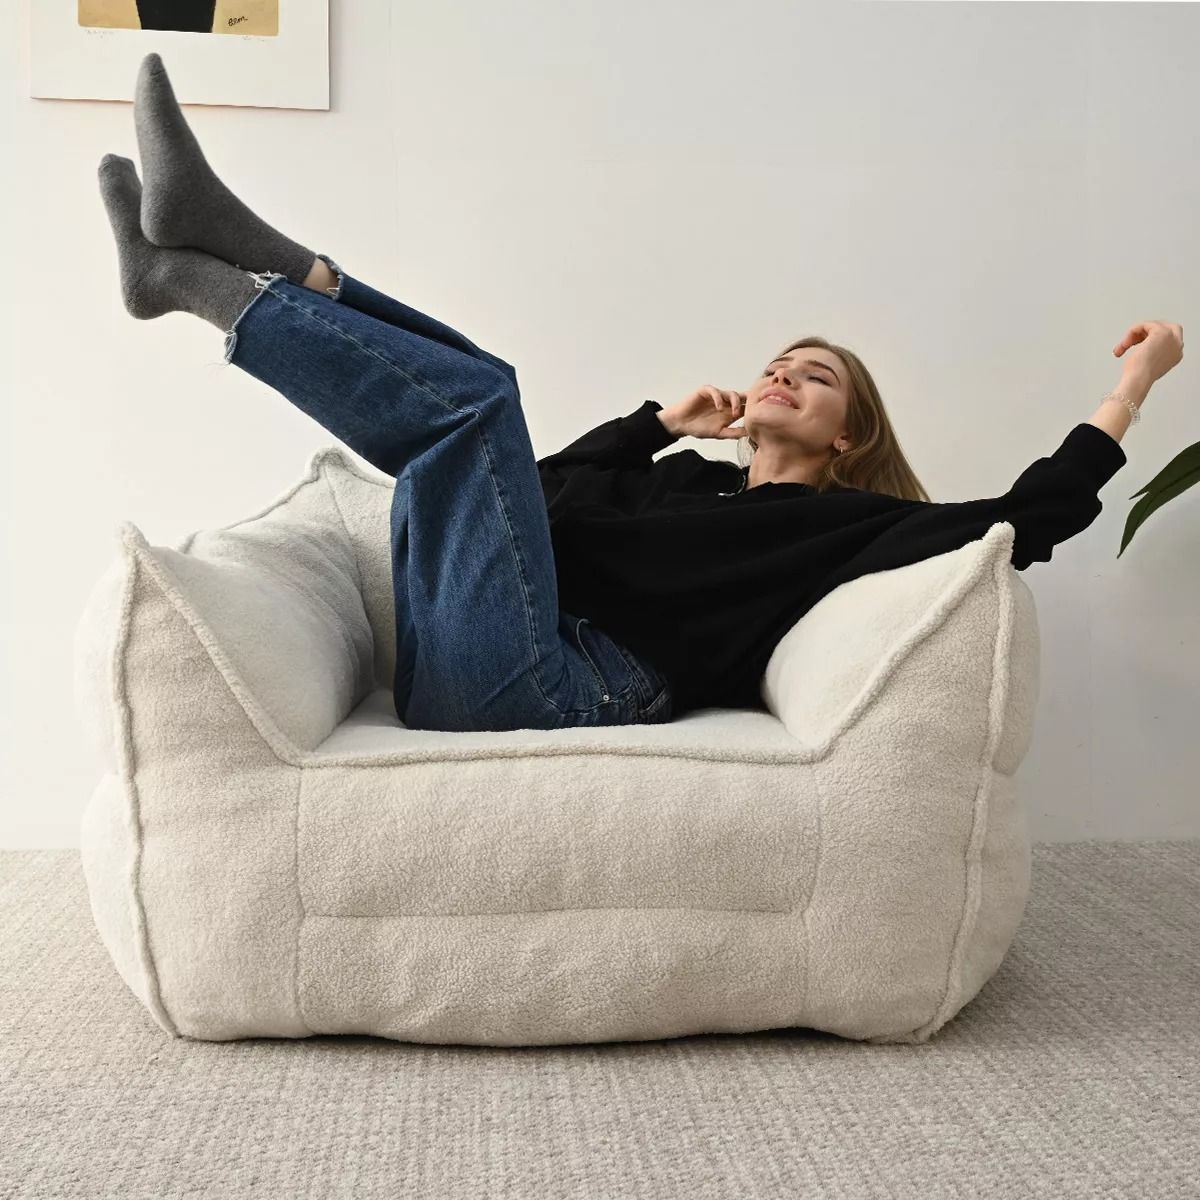 Sink Into Comfort: The Best Large Bean Bag Chairs for Adults